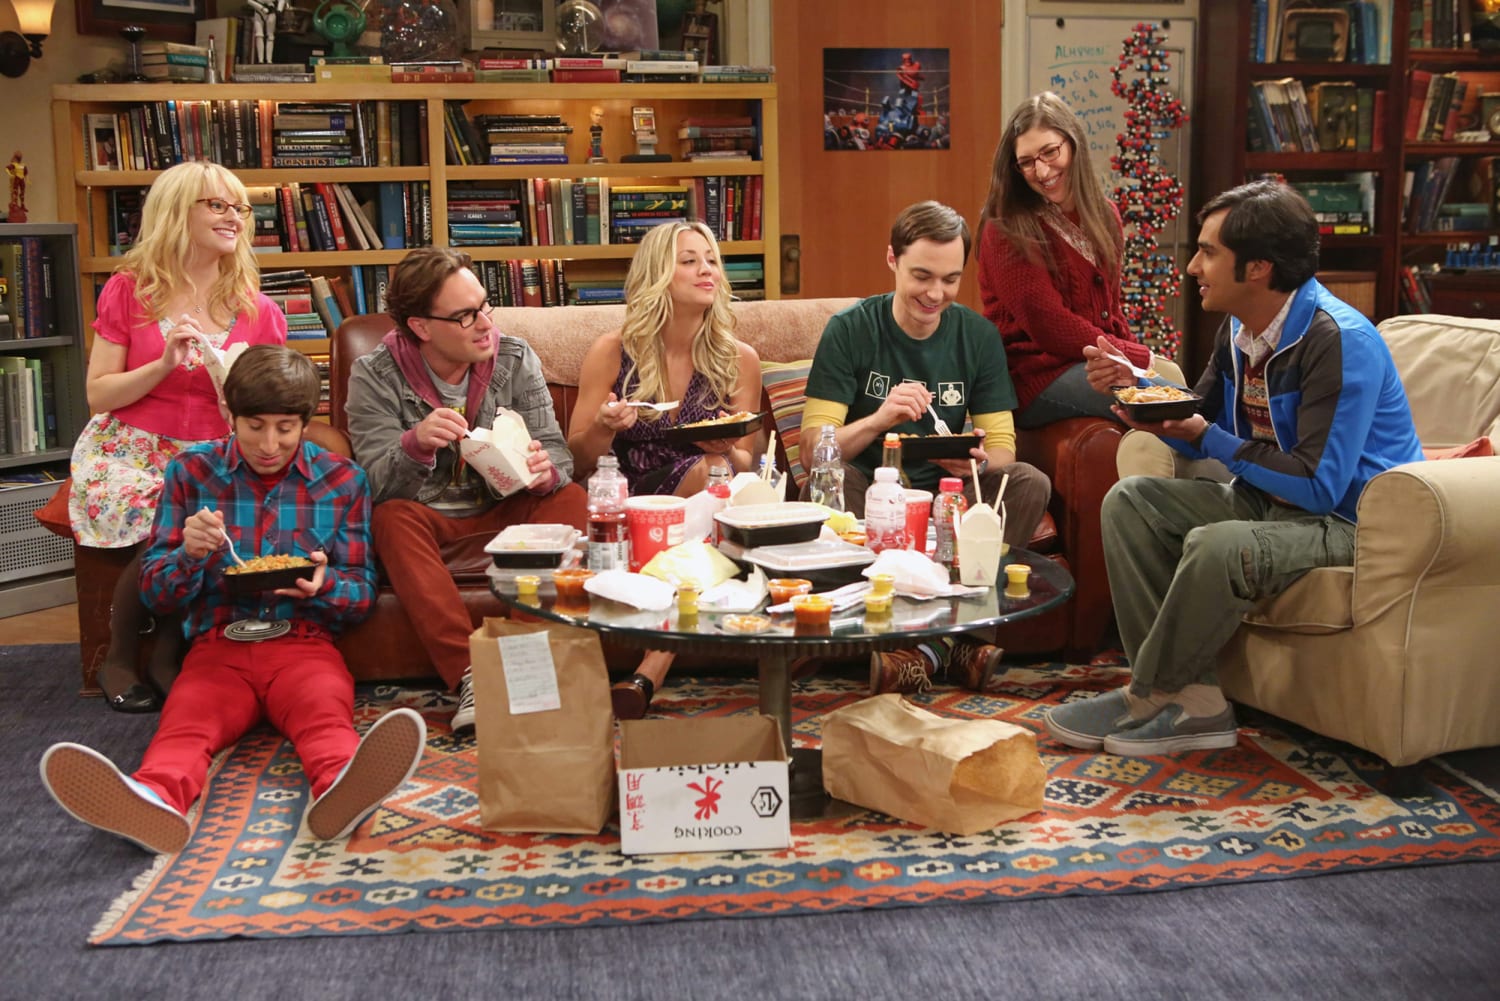 Jim Parsons hasn't cried about 'Big Bang Theory' ending, cast worried